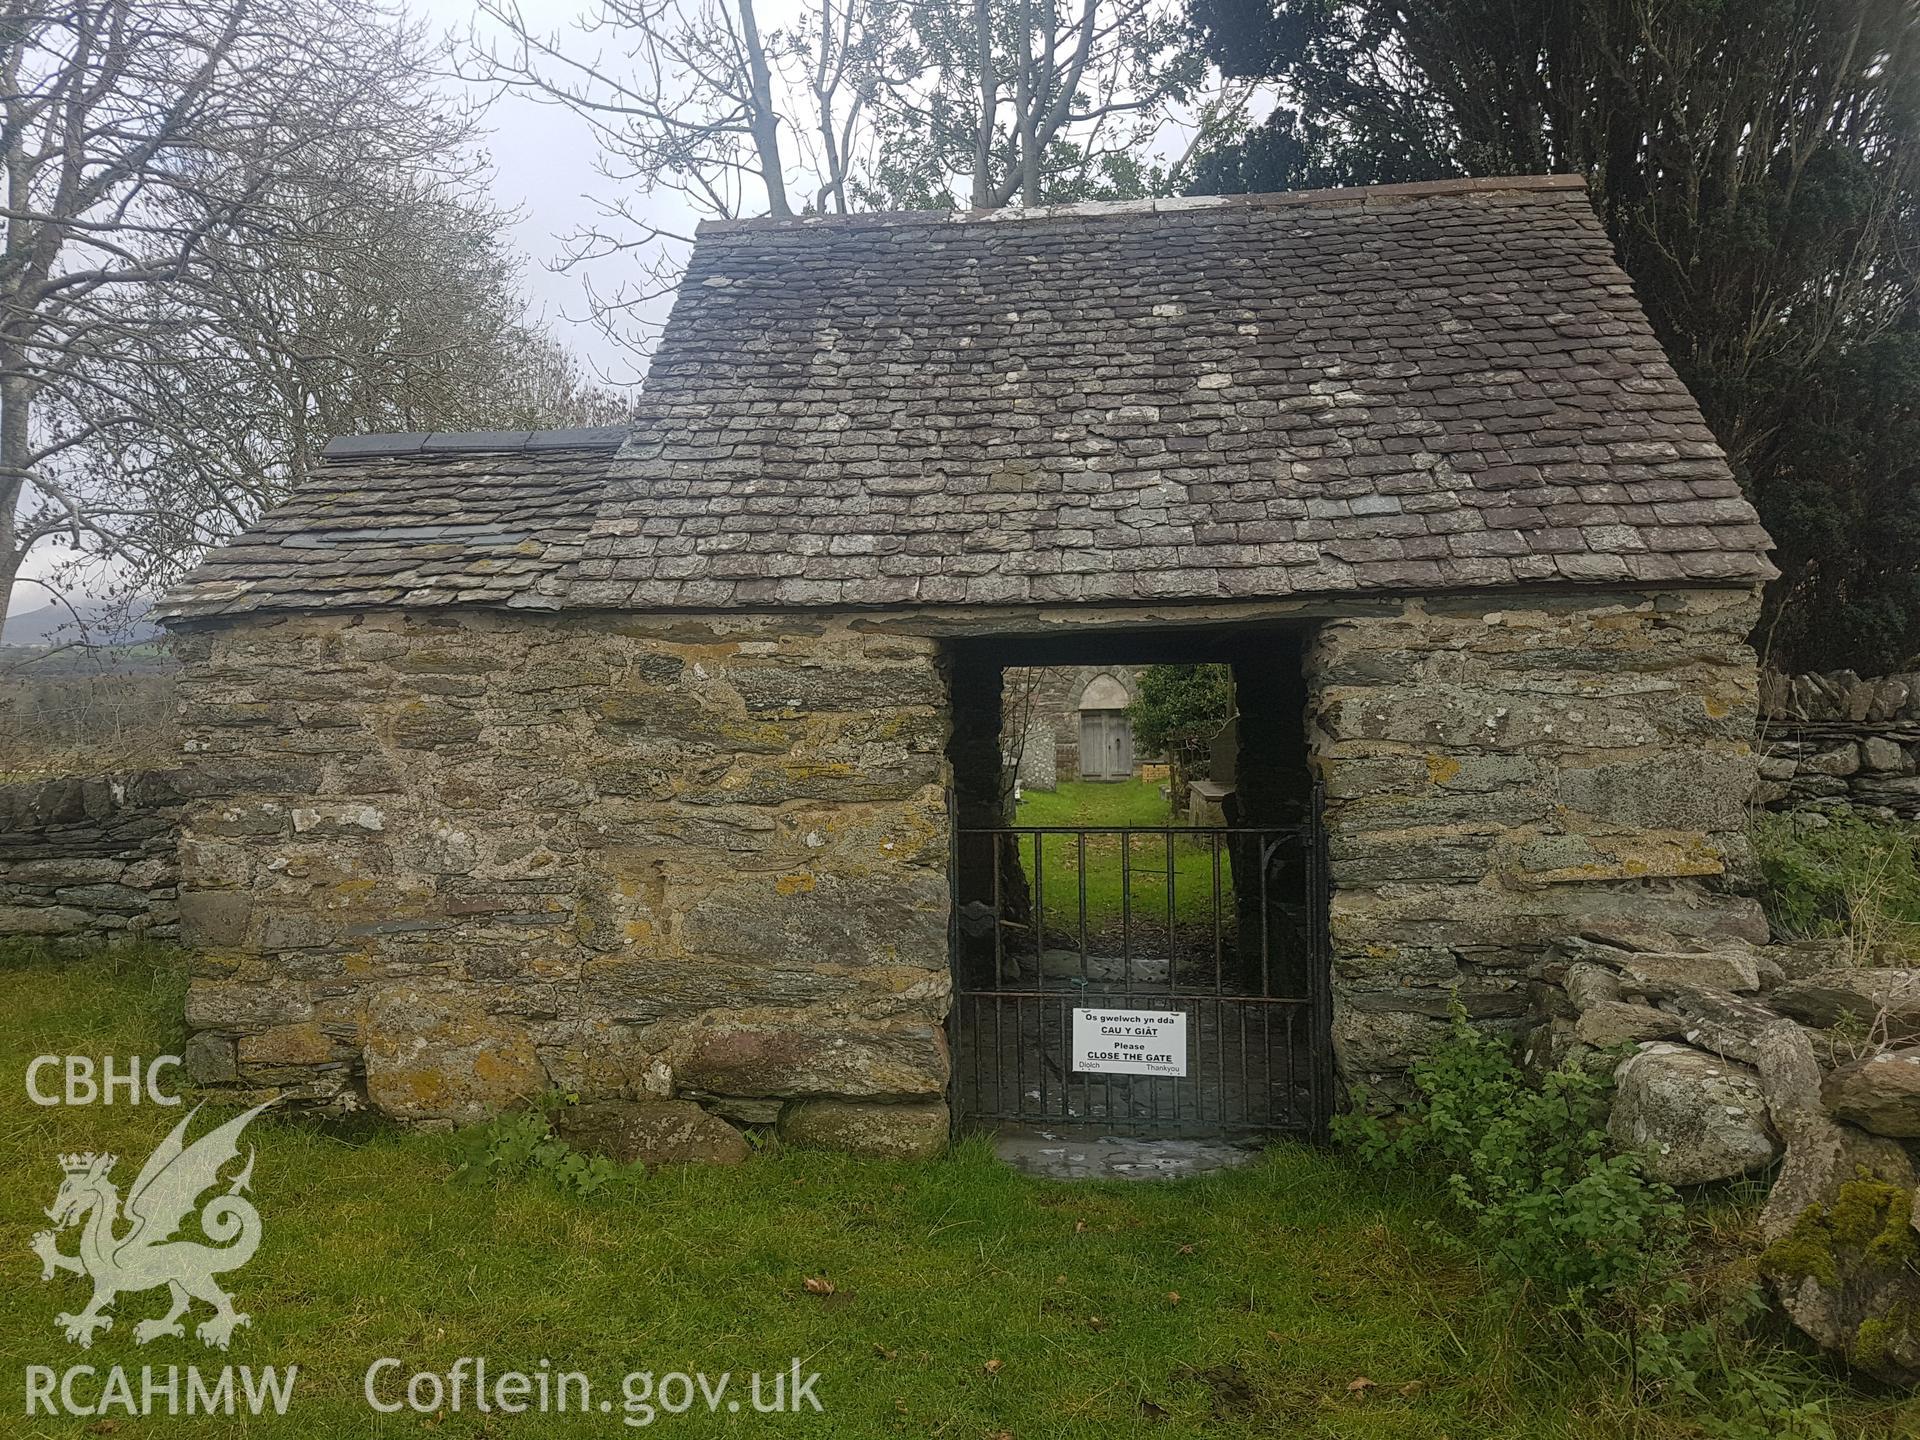 Lychgate at St Cynhaiarn church. Photographed by Helen Rowe of RCAHMW on 10th October 2020.